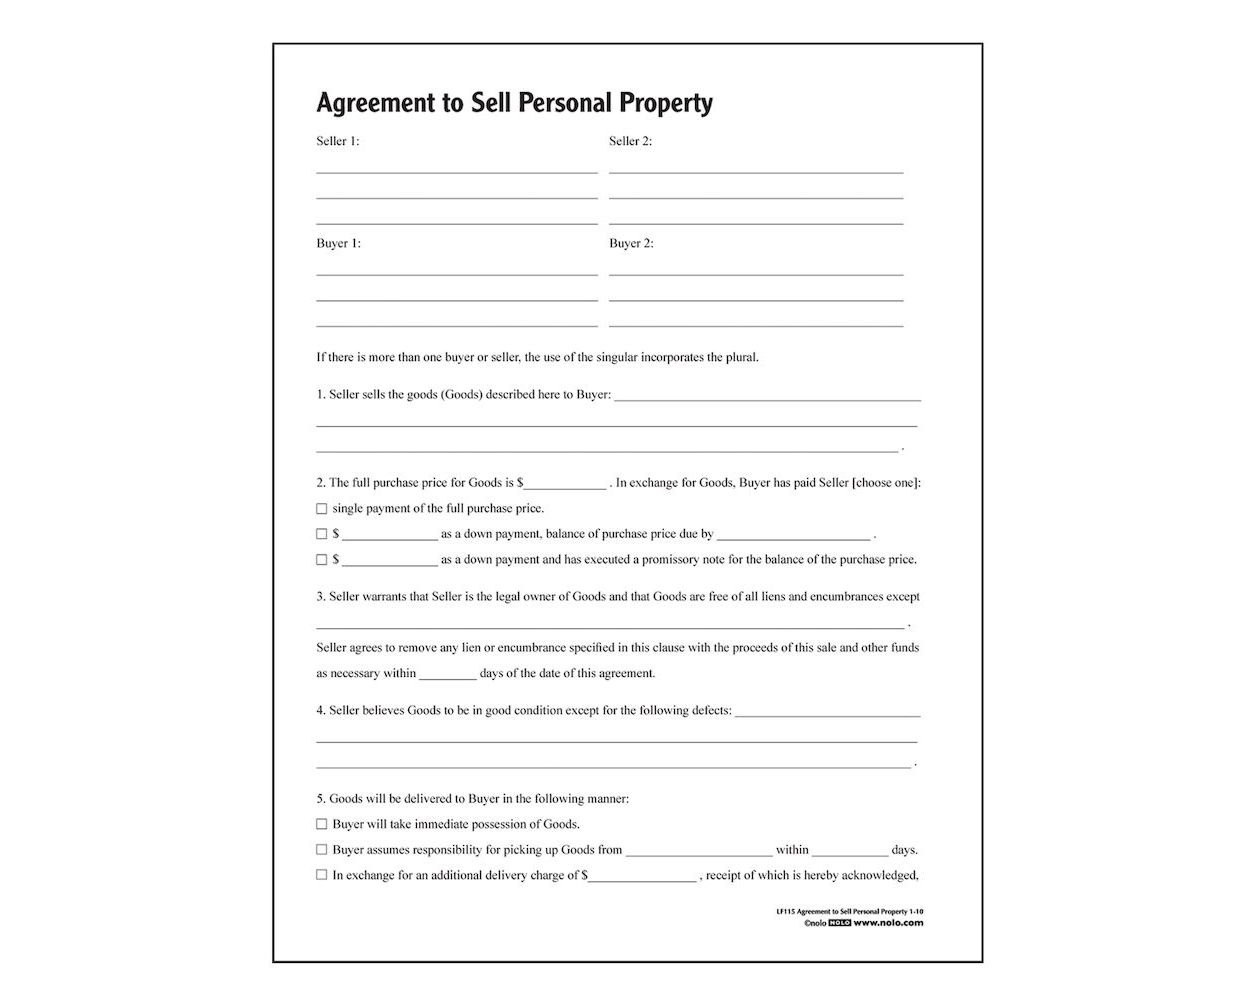 Adams Agreement To Sell Personal Property Forms And Instructions